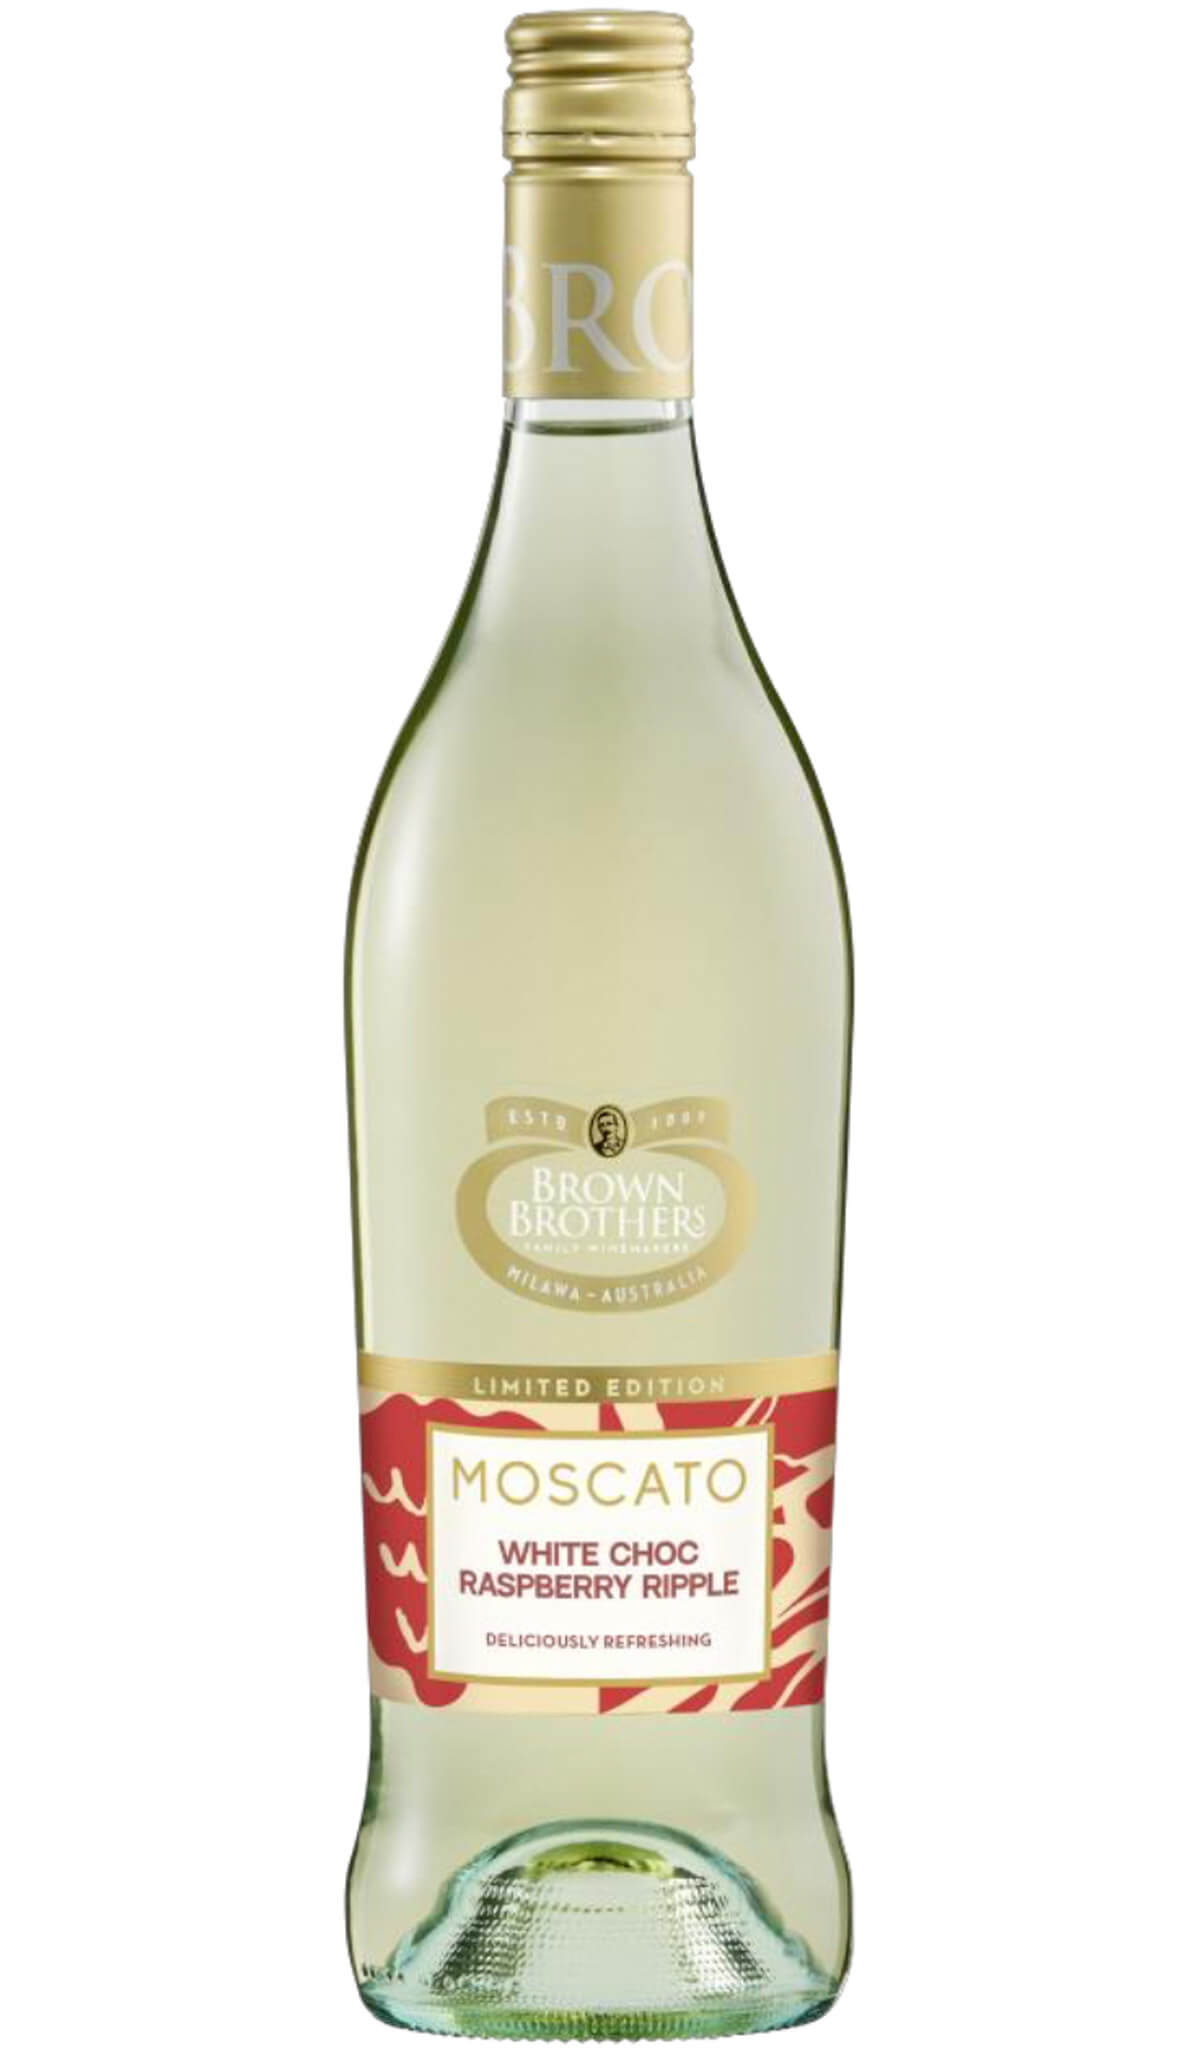 Find out more, explore the range and buy Brown Brothers White Chocolate & Raspberry Moscato 750mL online at Wine Sellers Direct - Australia's independent liquor specialists.